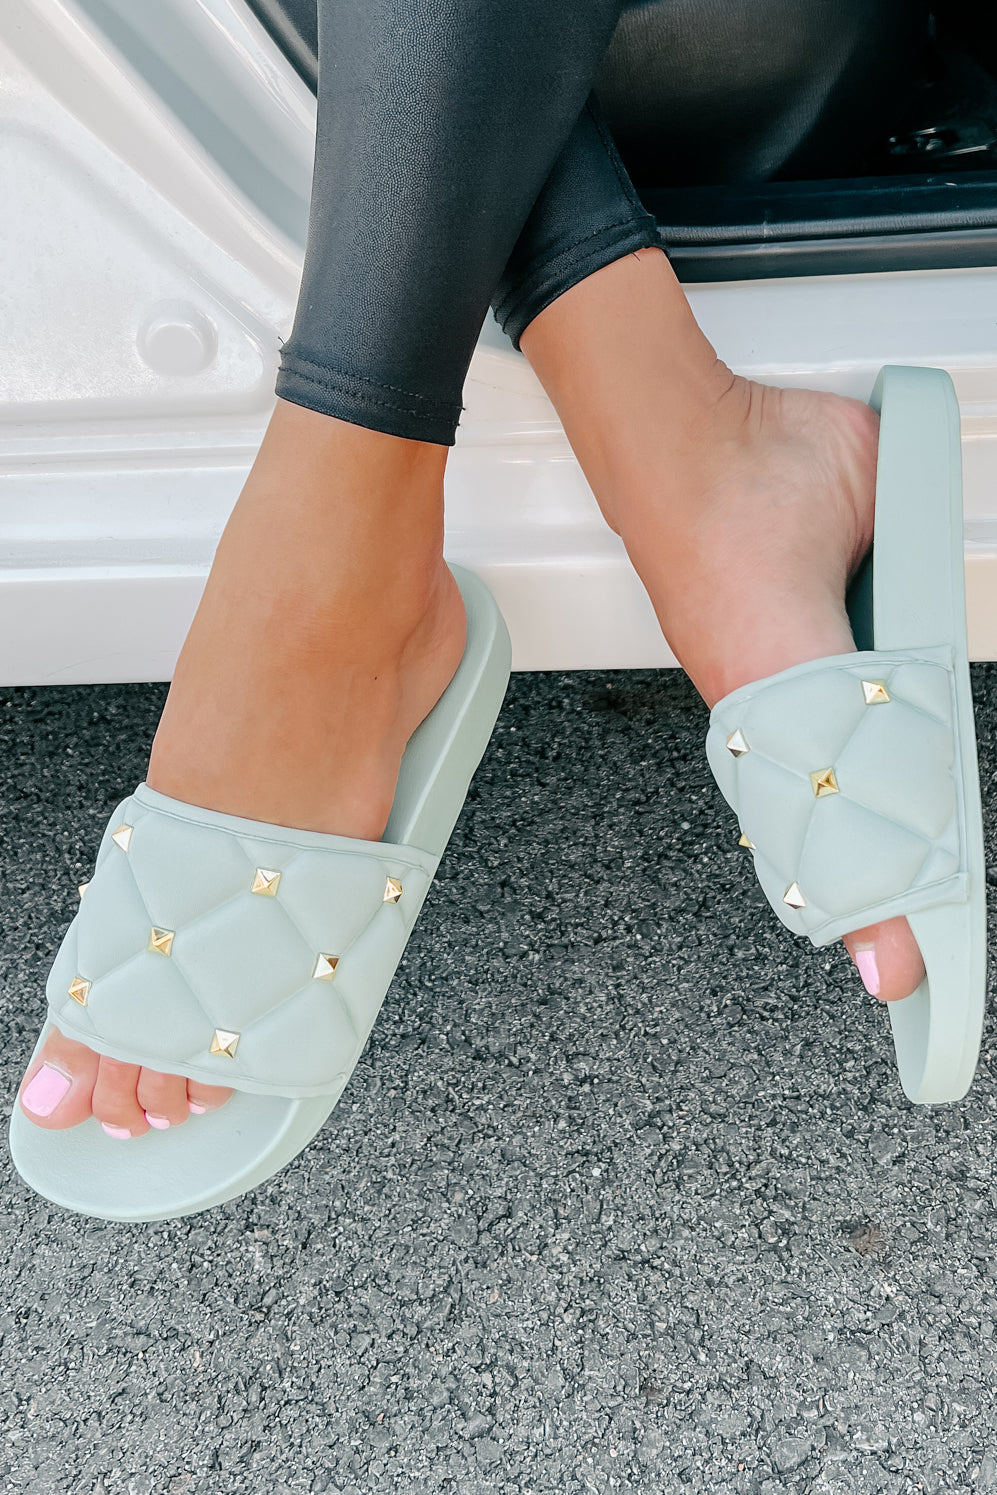 Treating Myself Quilted Studded Slides (Light Teal) - NanaMacs